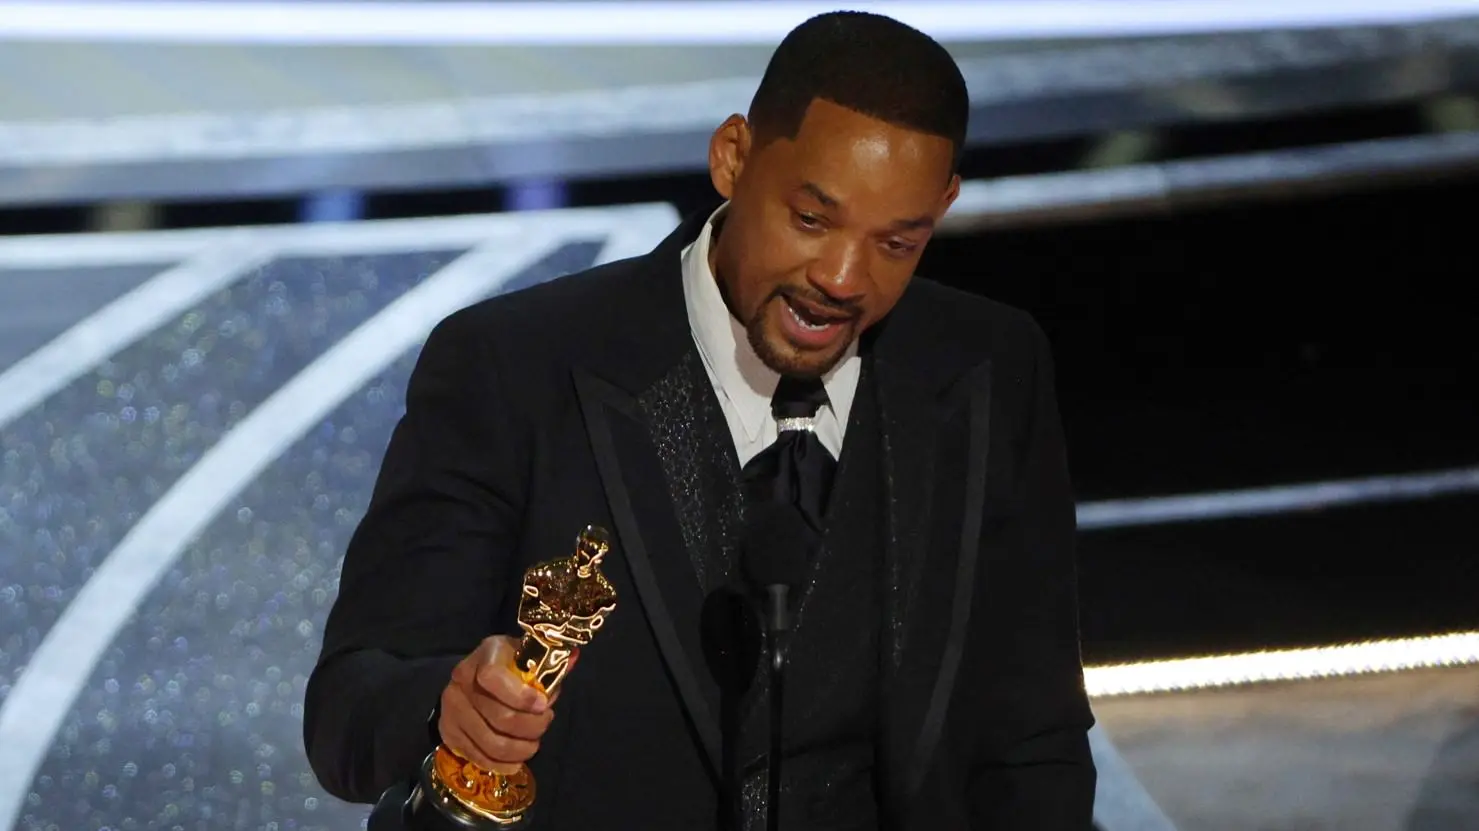 will-smith-reuters-66828ee08985f.webp